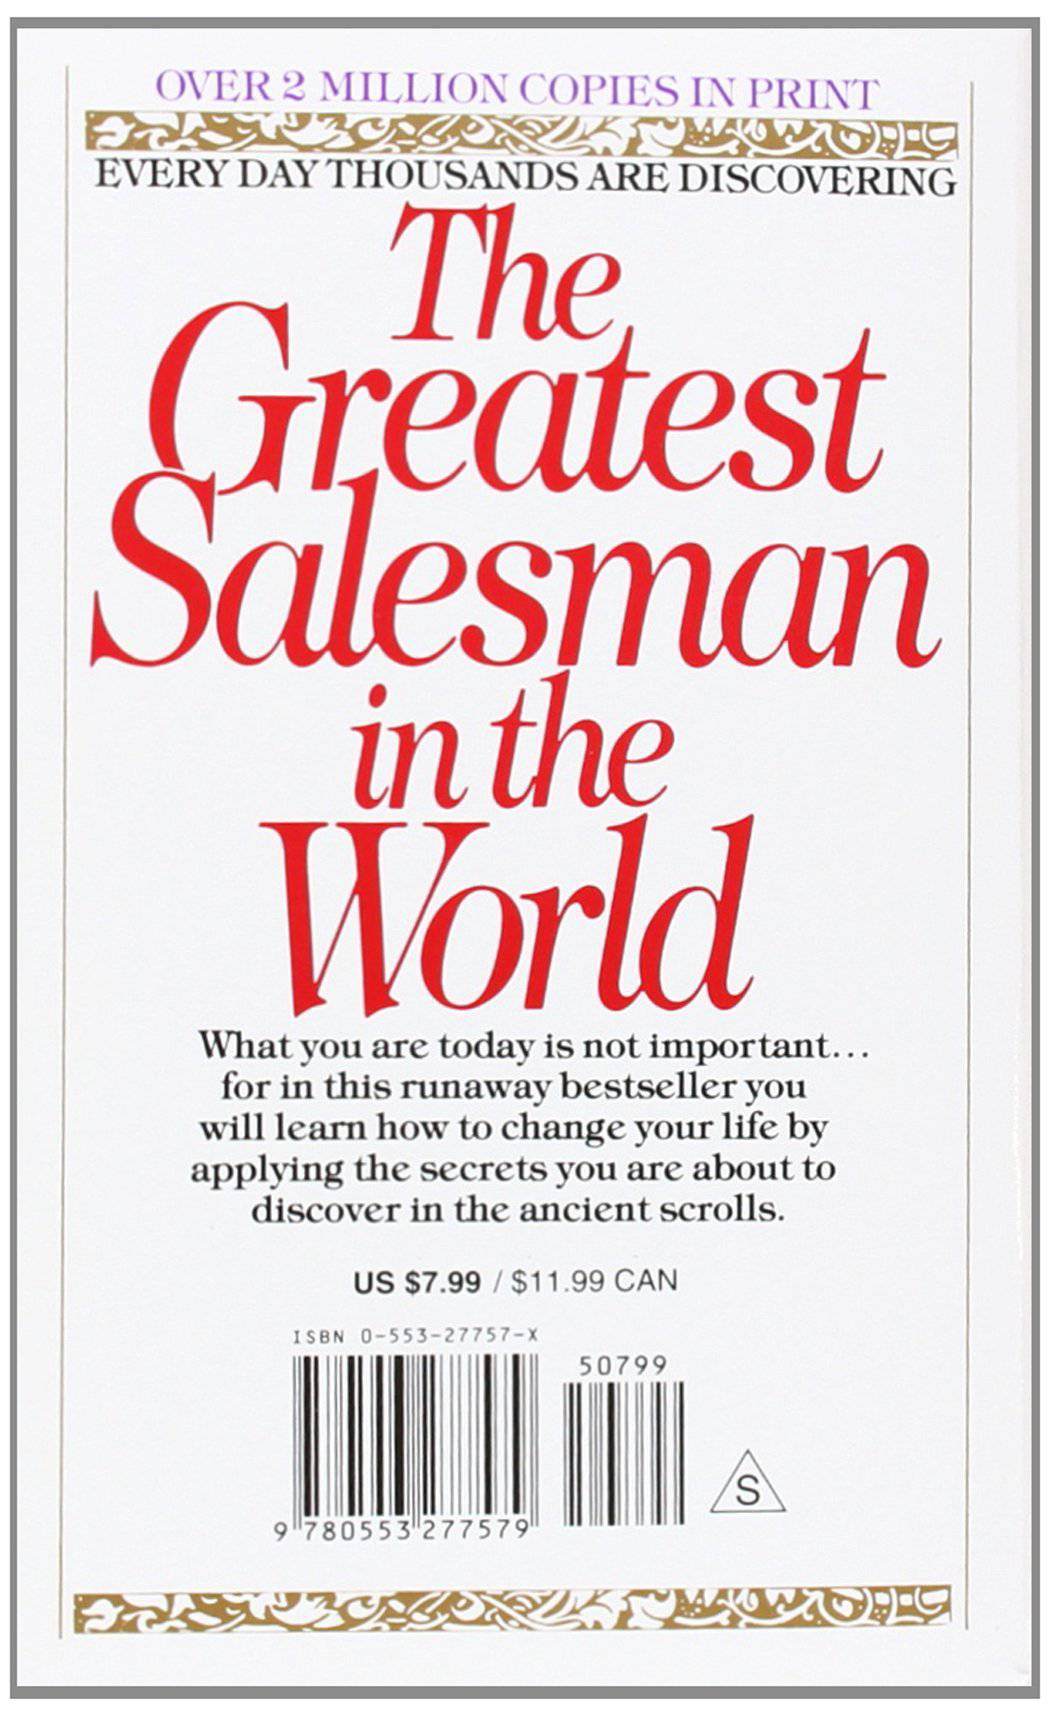 The Greatest Salesman in the World, Part II